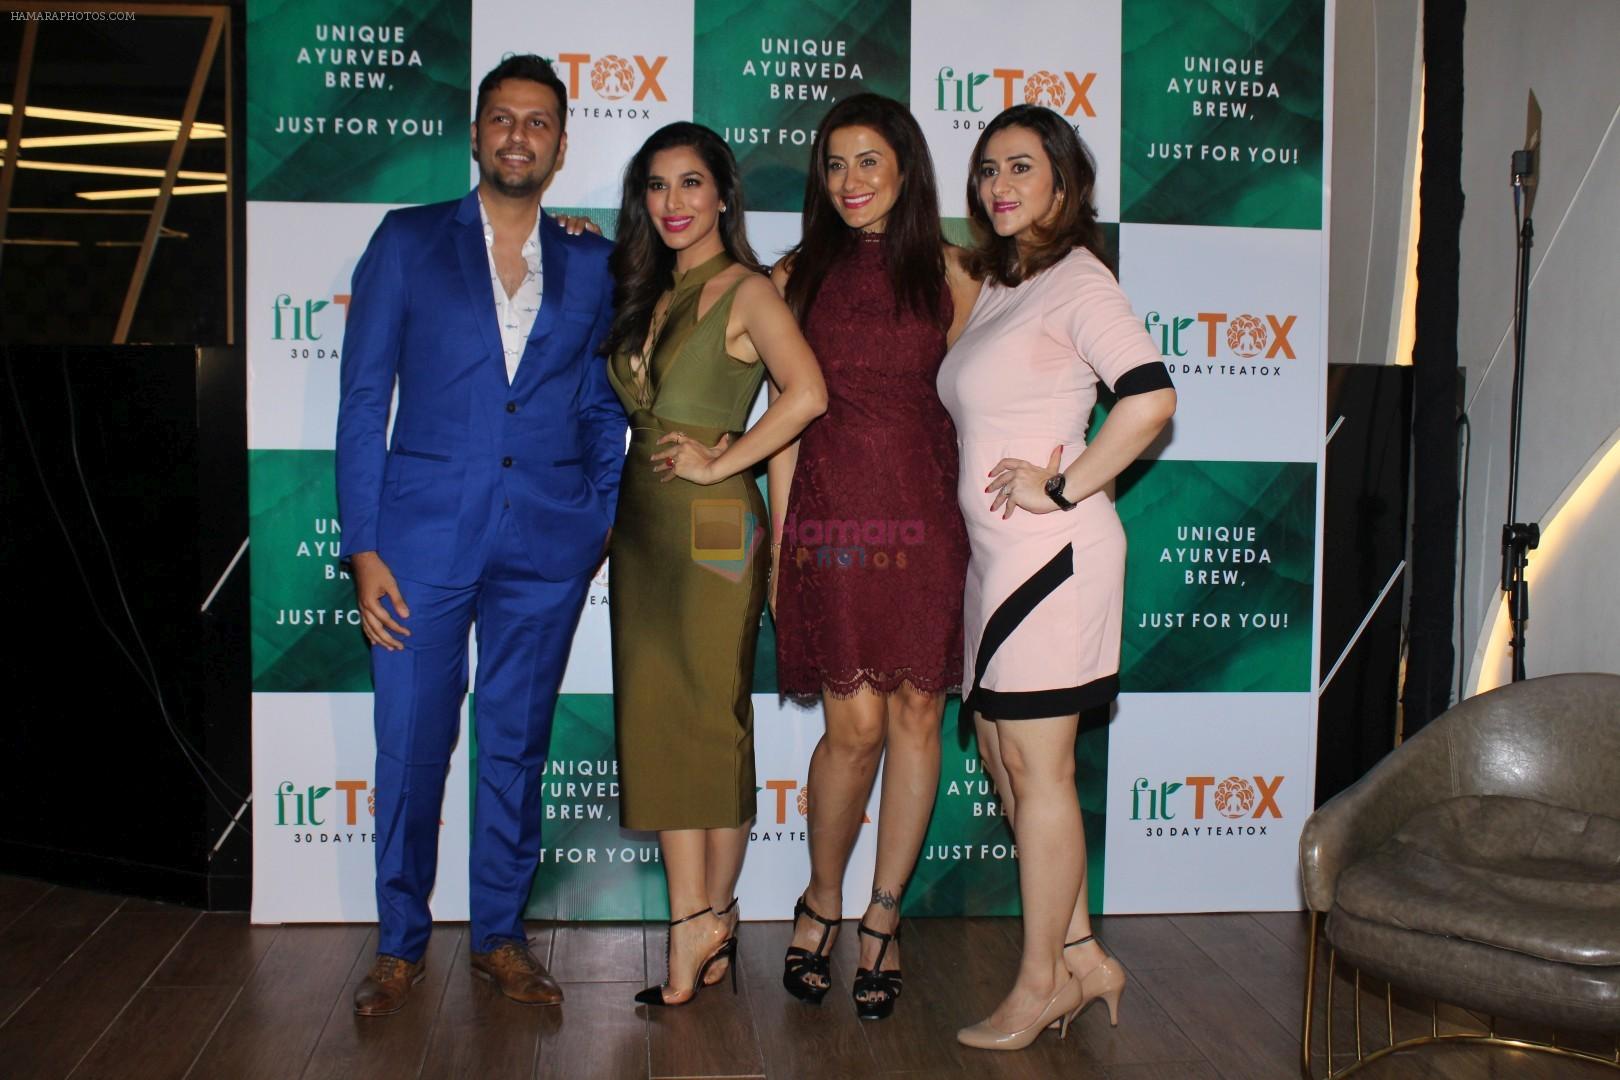 Sophie choudry Turned Entrepreneur And Launched Her Own Tea Brand, Fittox on 23rd Nov 2017